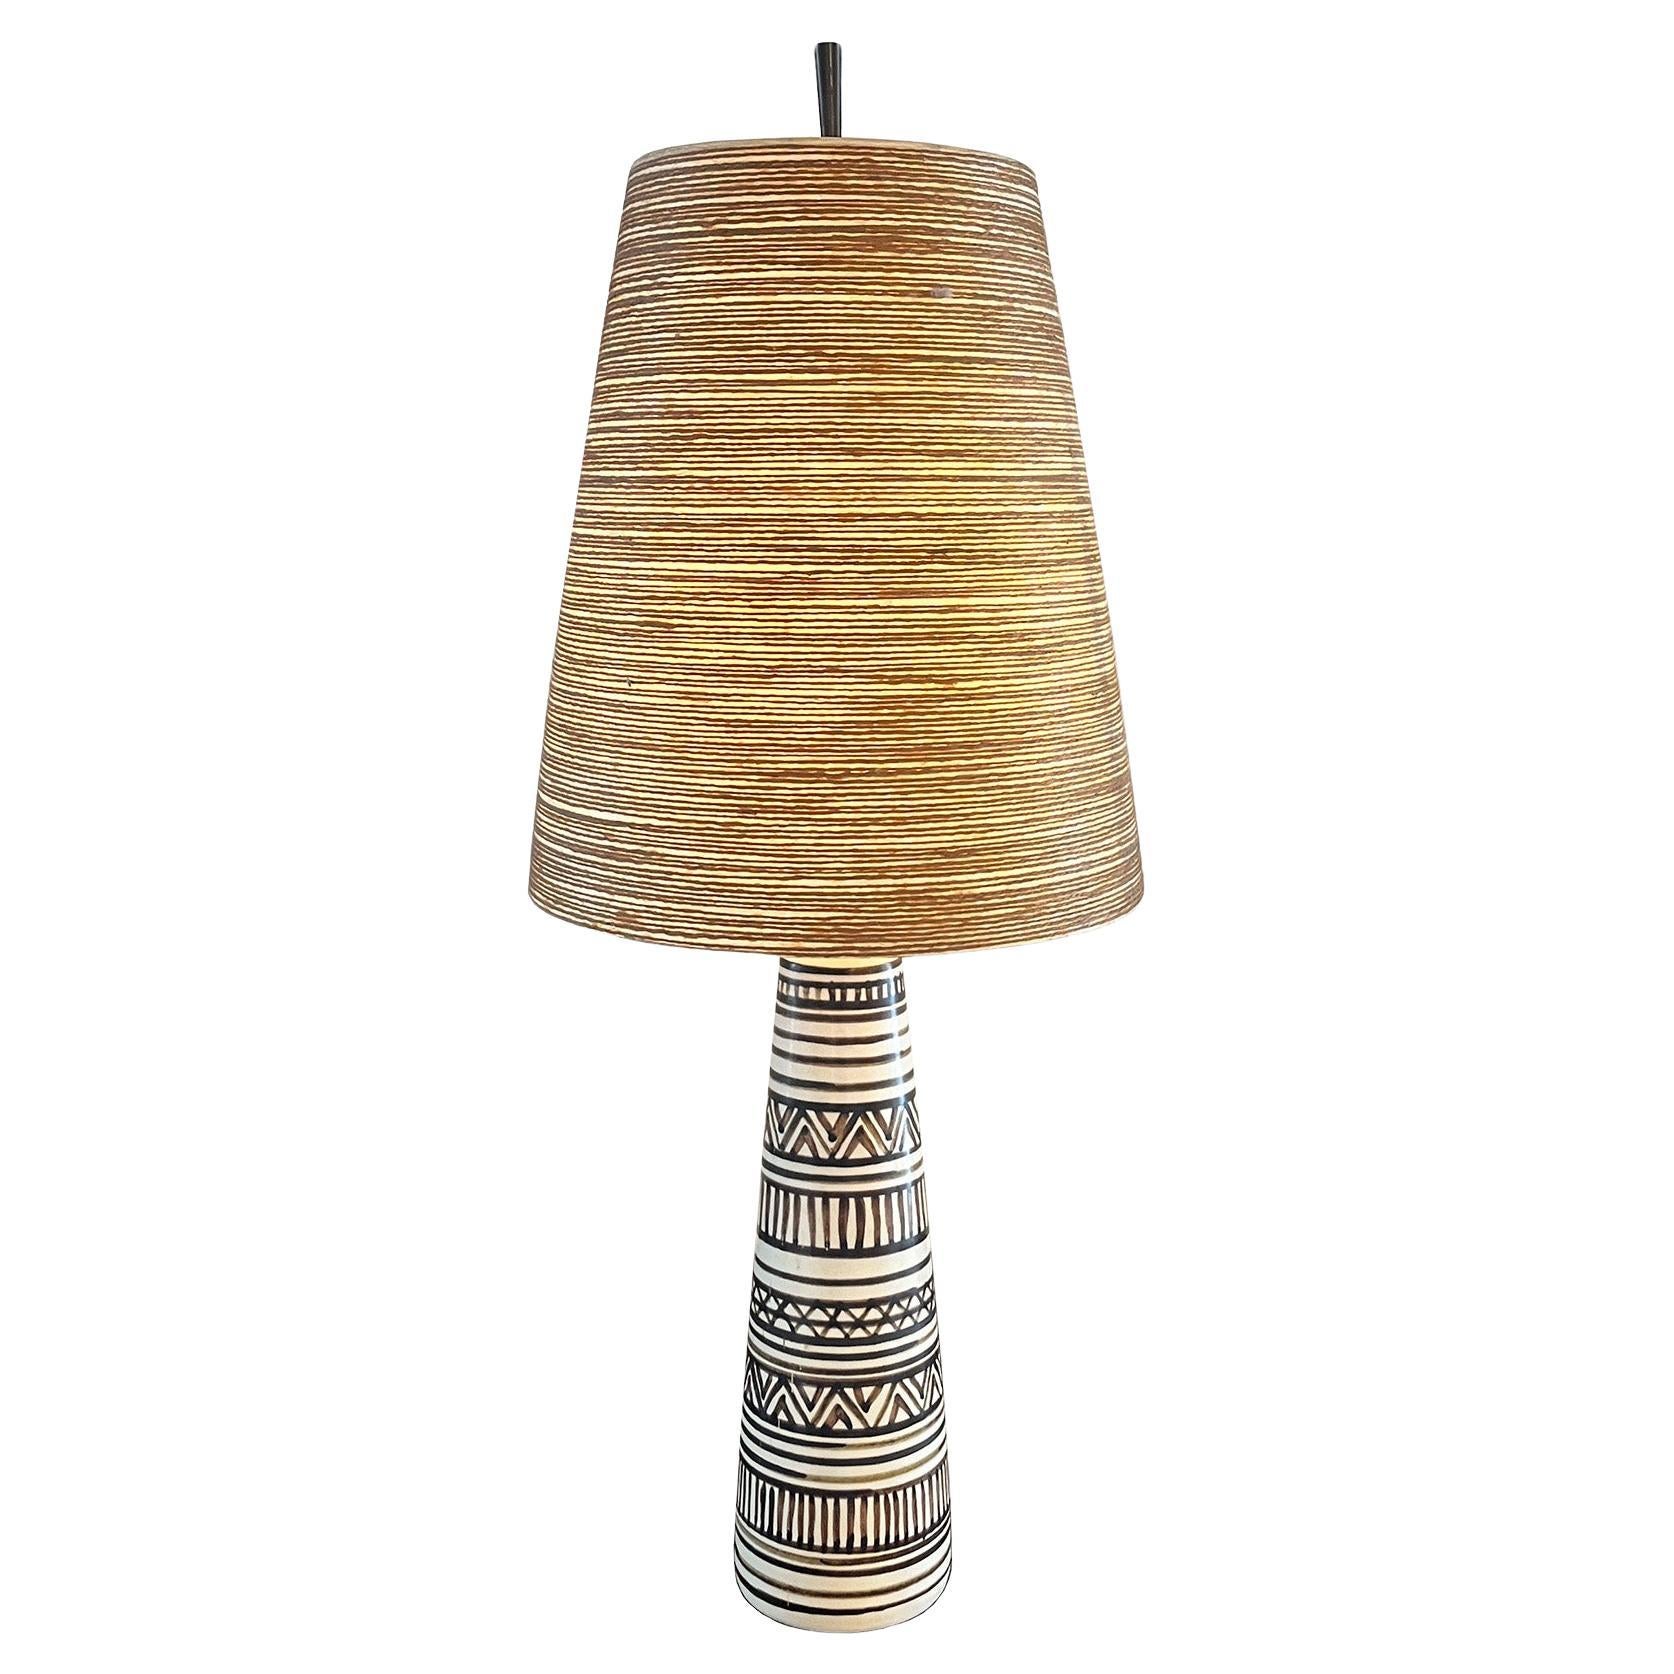 Rare early Lotte and Gunnar Bostlund Tribal Table Lamp with Original Shade  For Sale